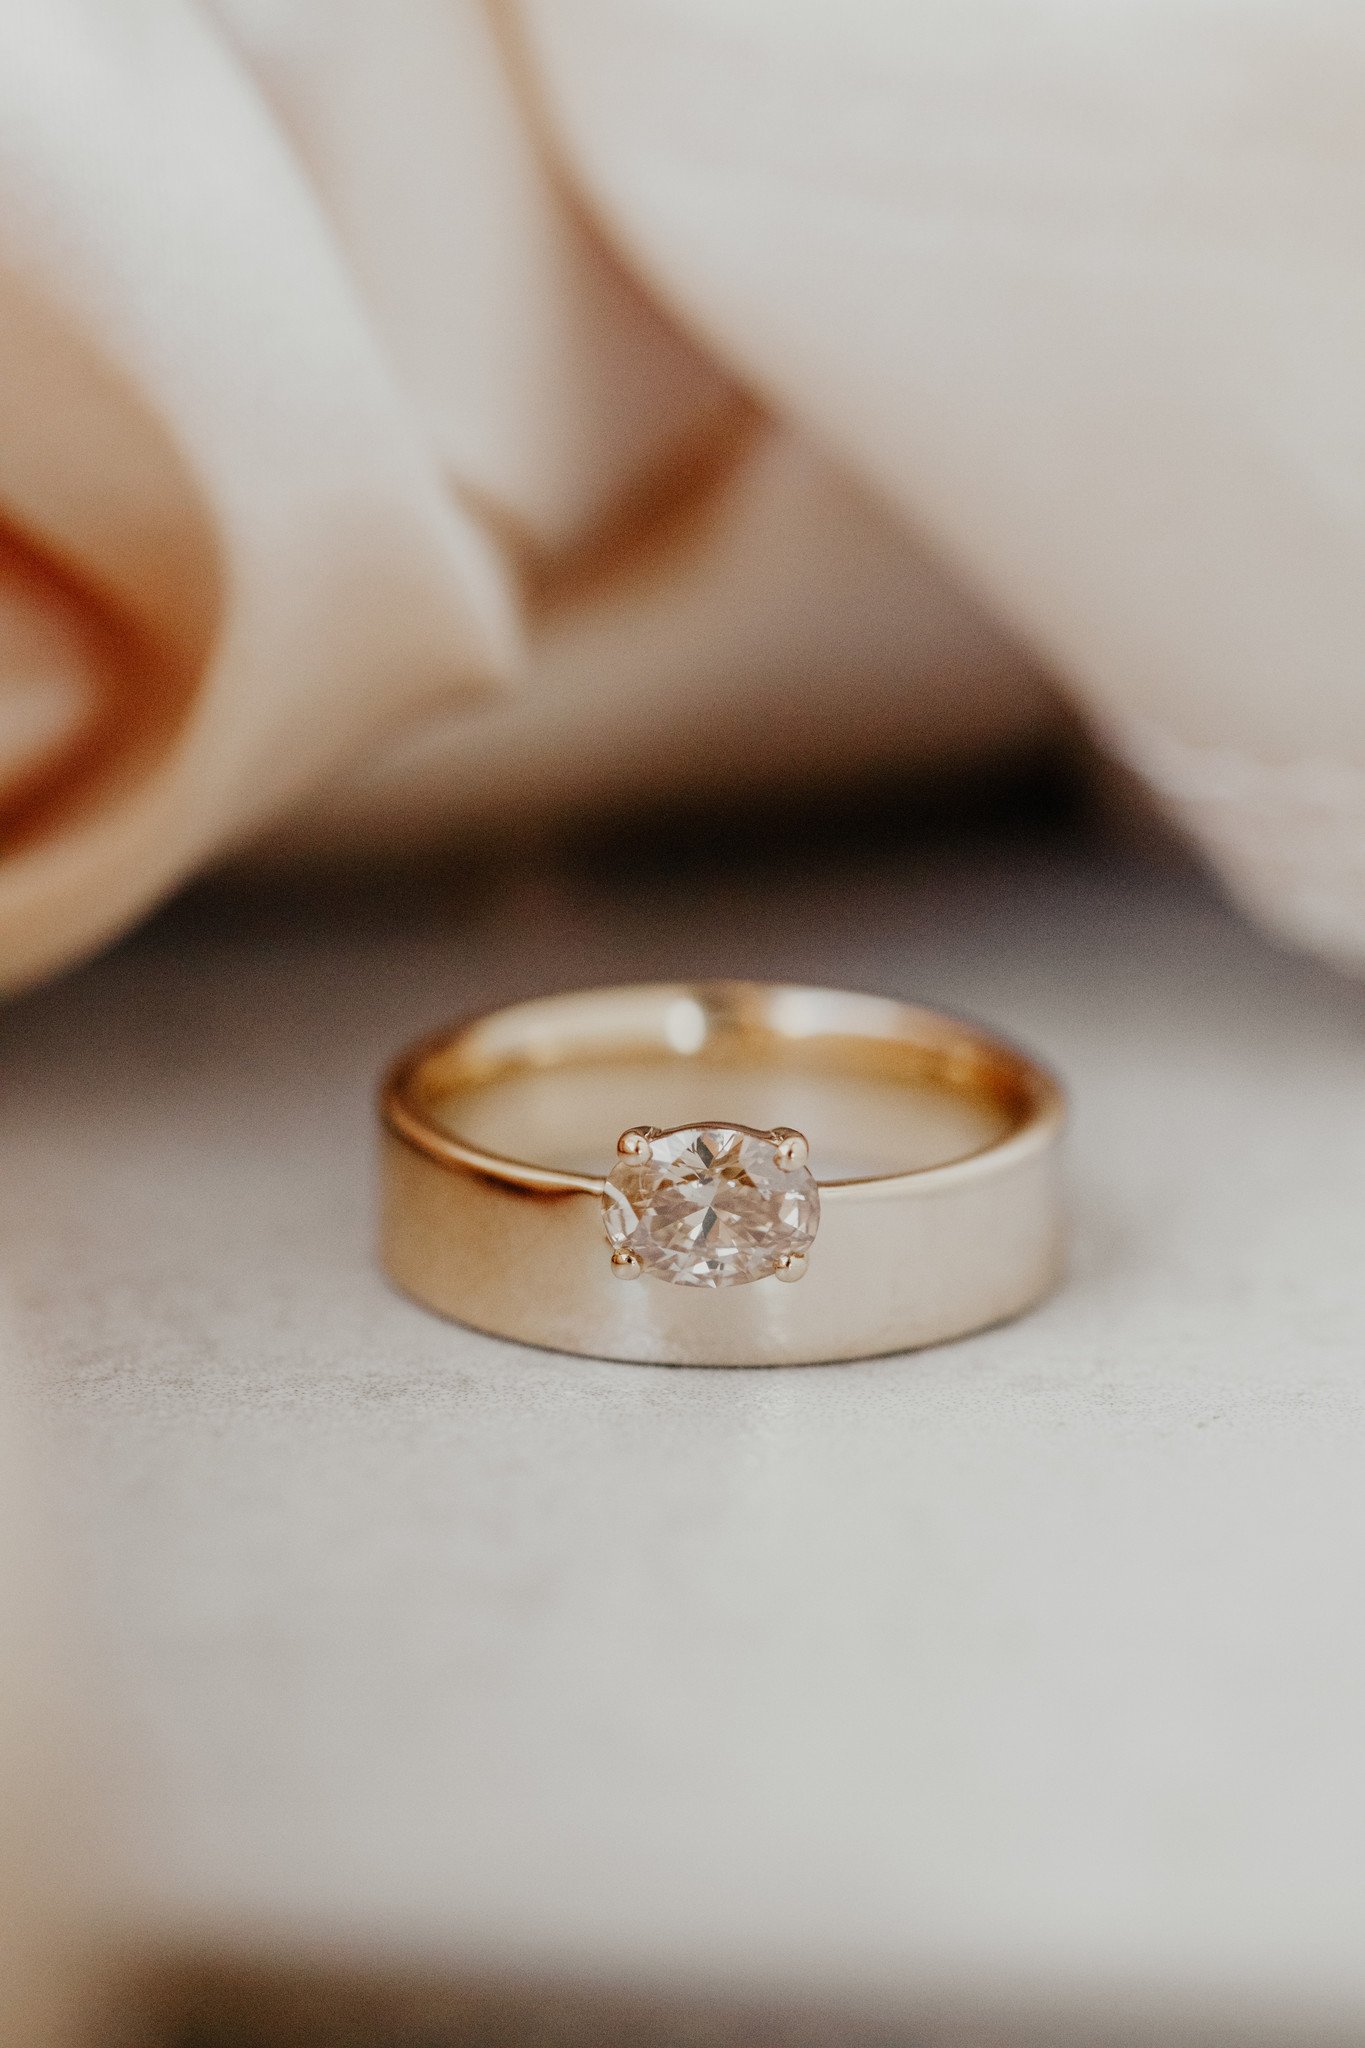 Emerald Cut Engagement Rings From Adiamor Are Timeless | Adiamor | Emerald engagement  ring cut, Engagement ring cuts, Dream engagement rings